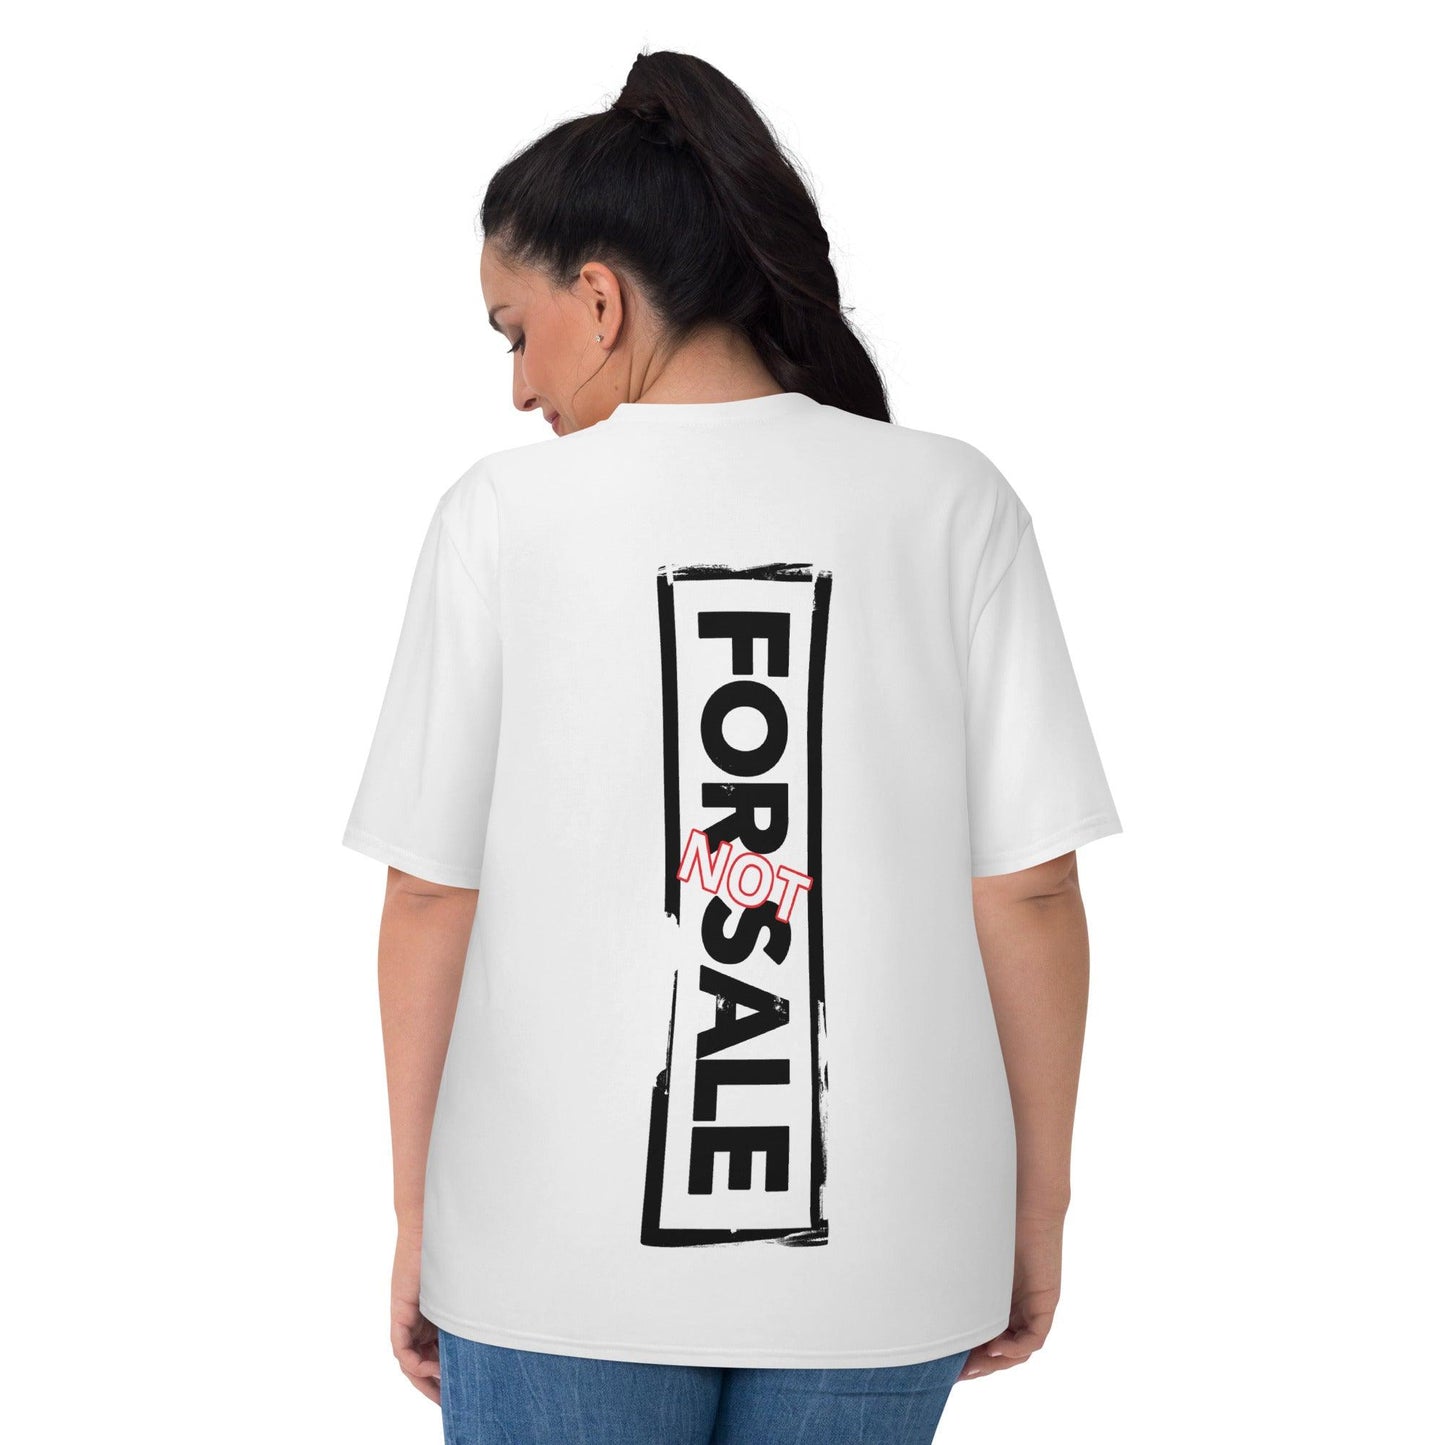 Not For Sale Black Stamp - Womens T-Shirt - iSAW Company